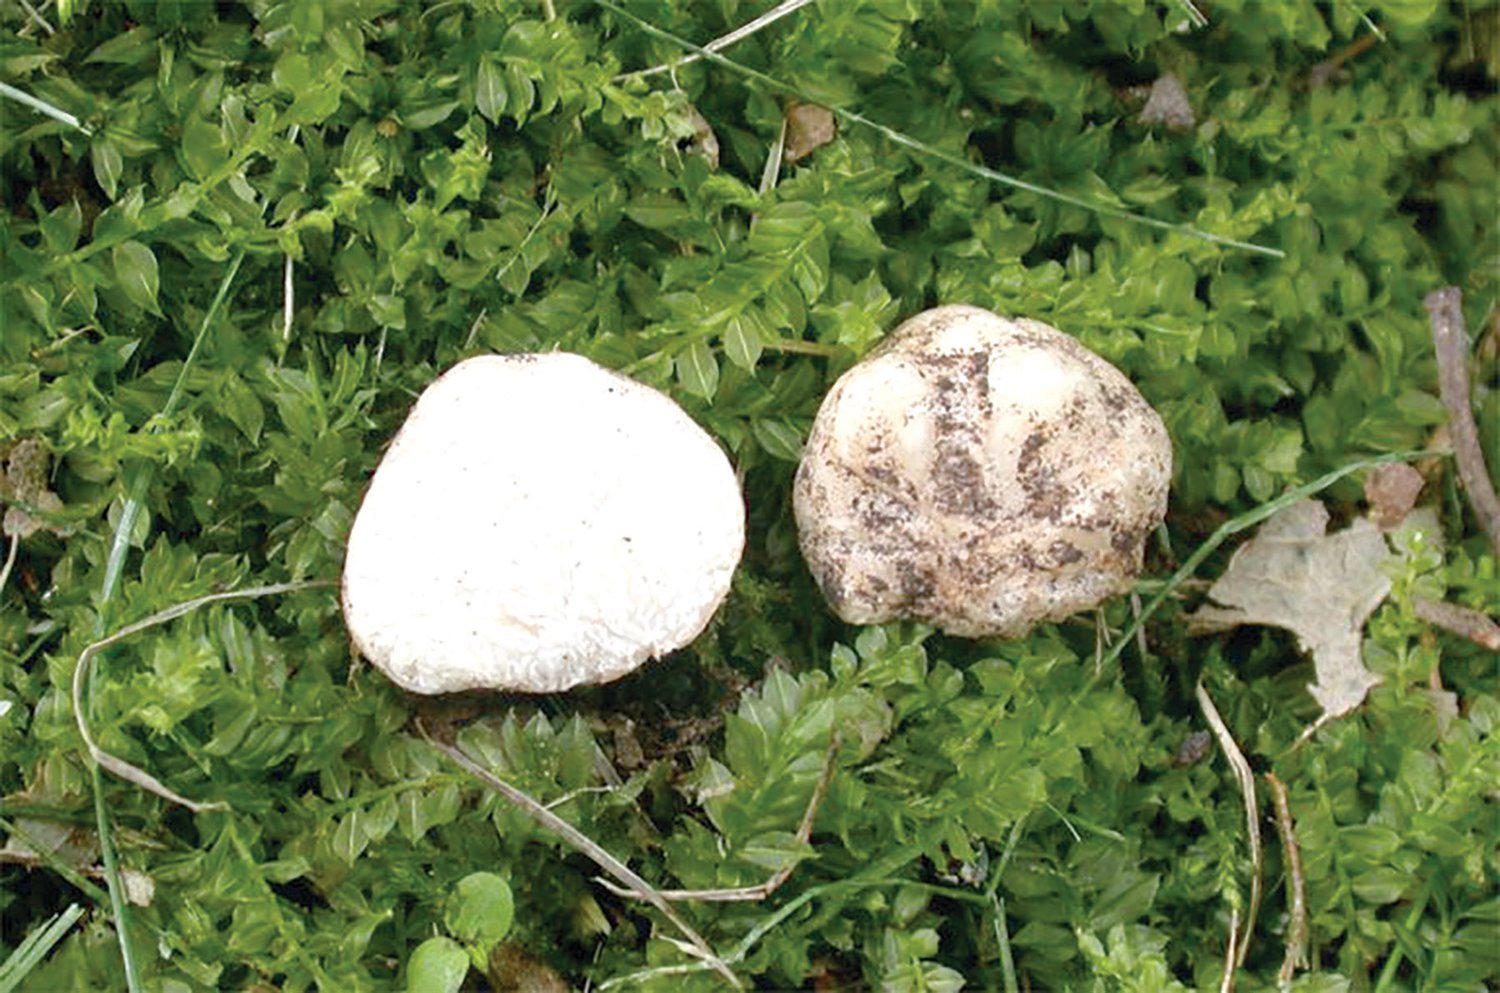 Tuber eburneum, was found in Iowa. It has an off-white exterior, smells a bit like a baked potato and is related to the Périgord black truffle, a species often used in high end cuisine.